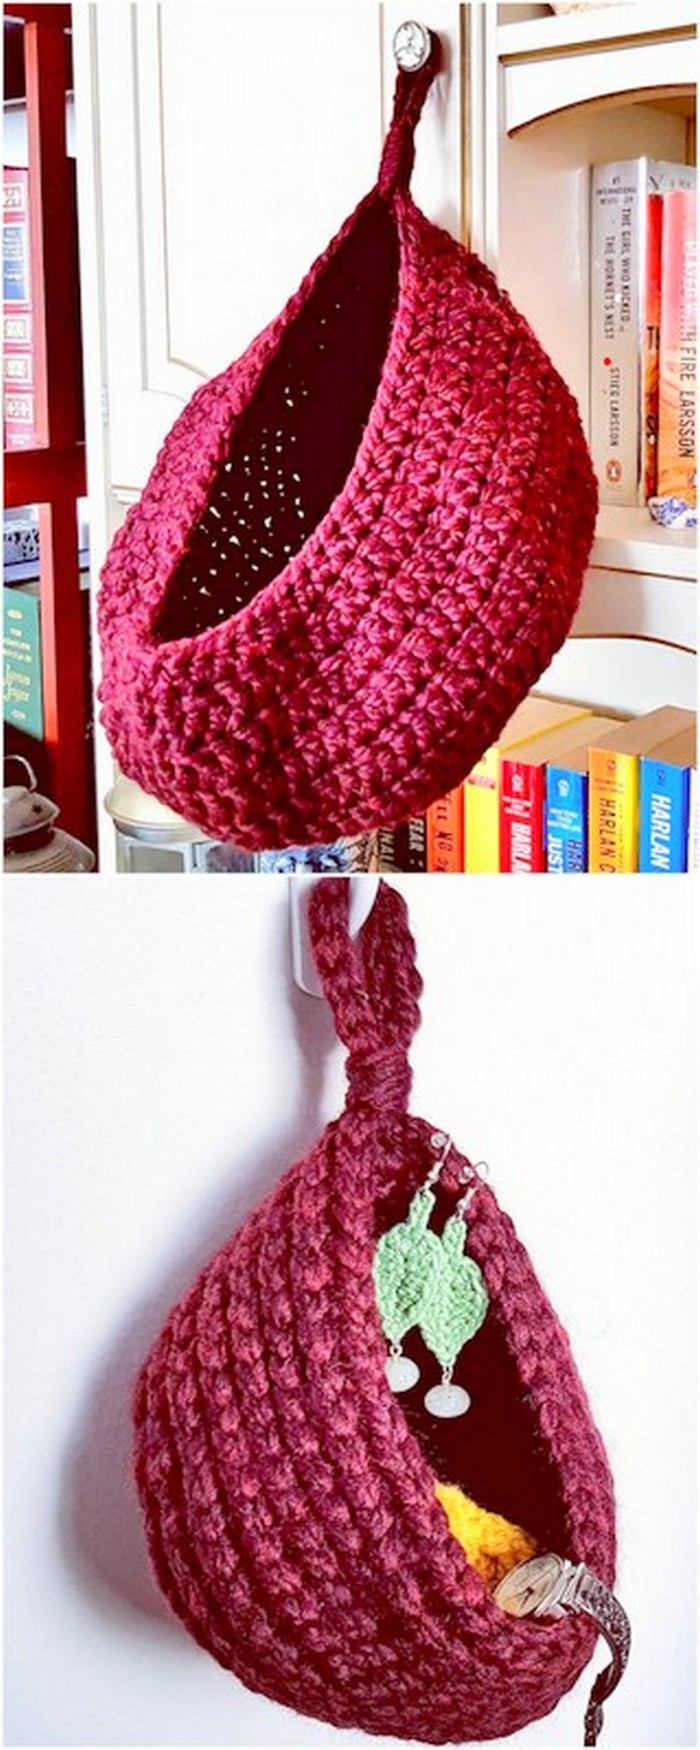 best crochet pattern to try at home